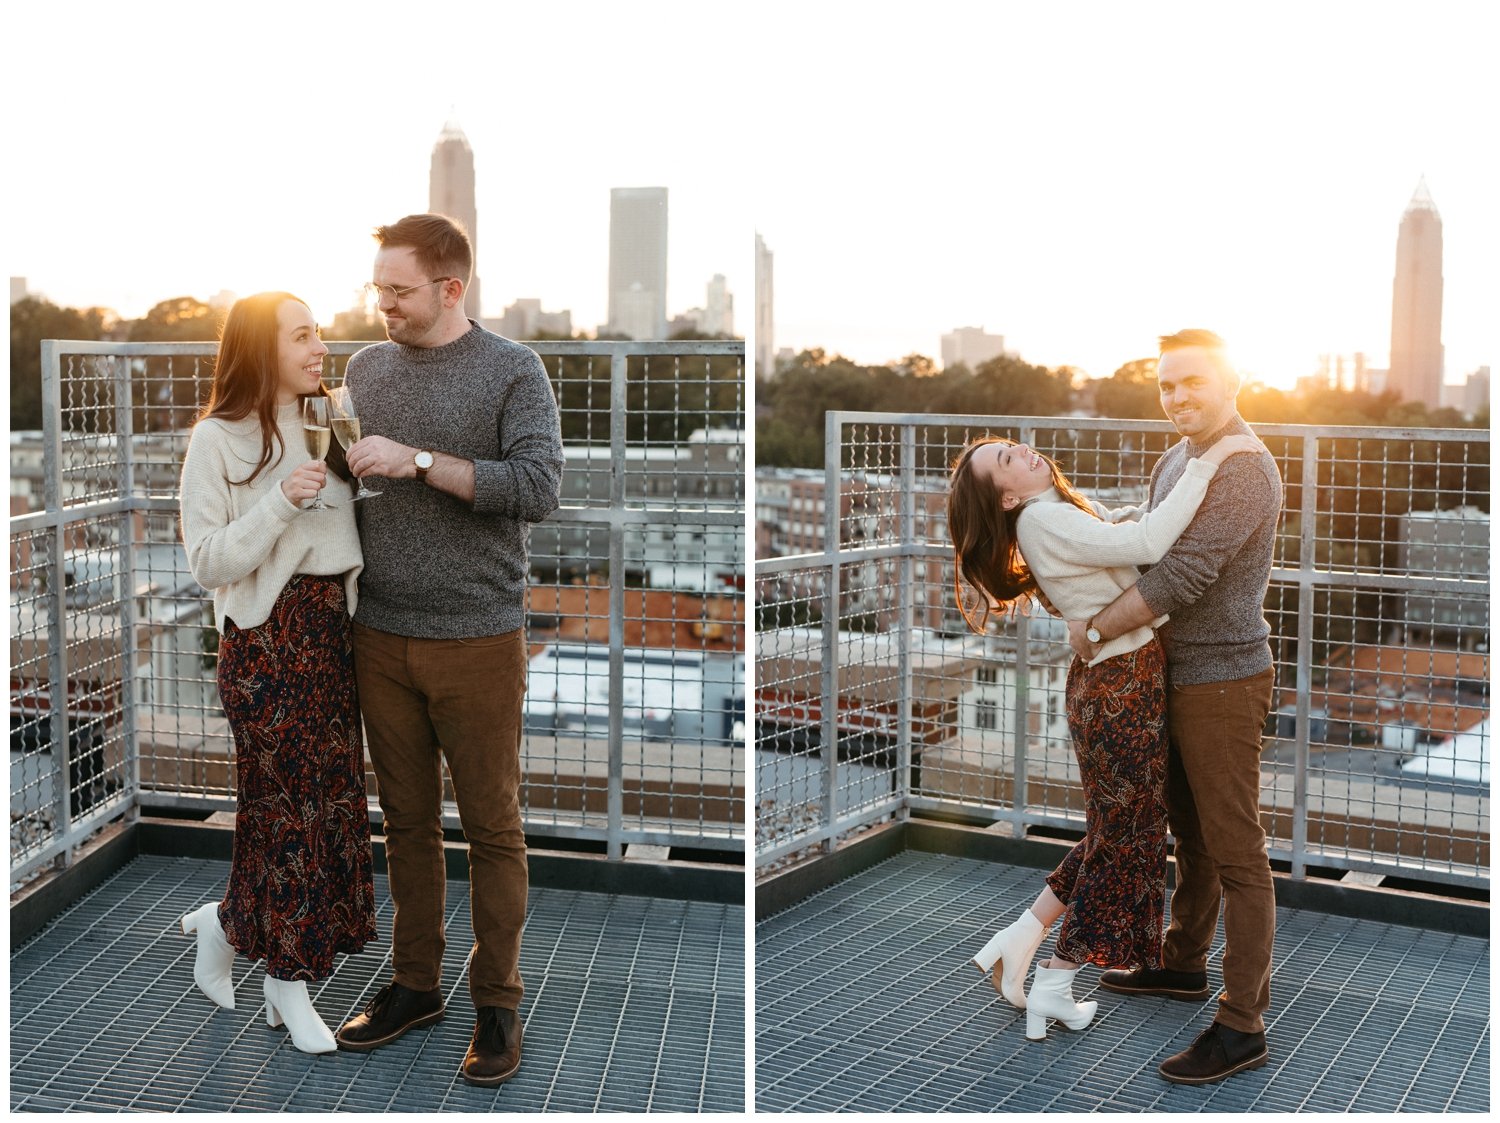 Atlanta engagement photos of a champagne toast at sunset